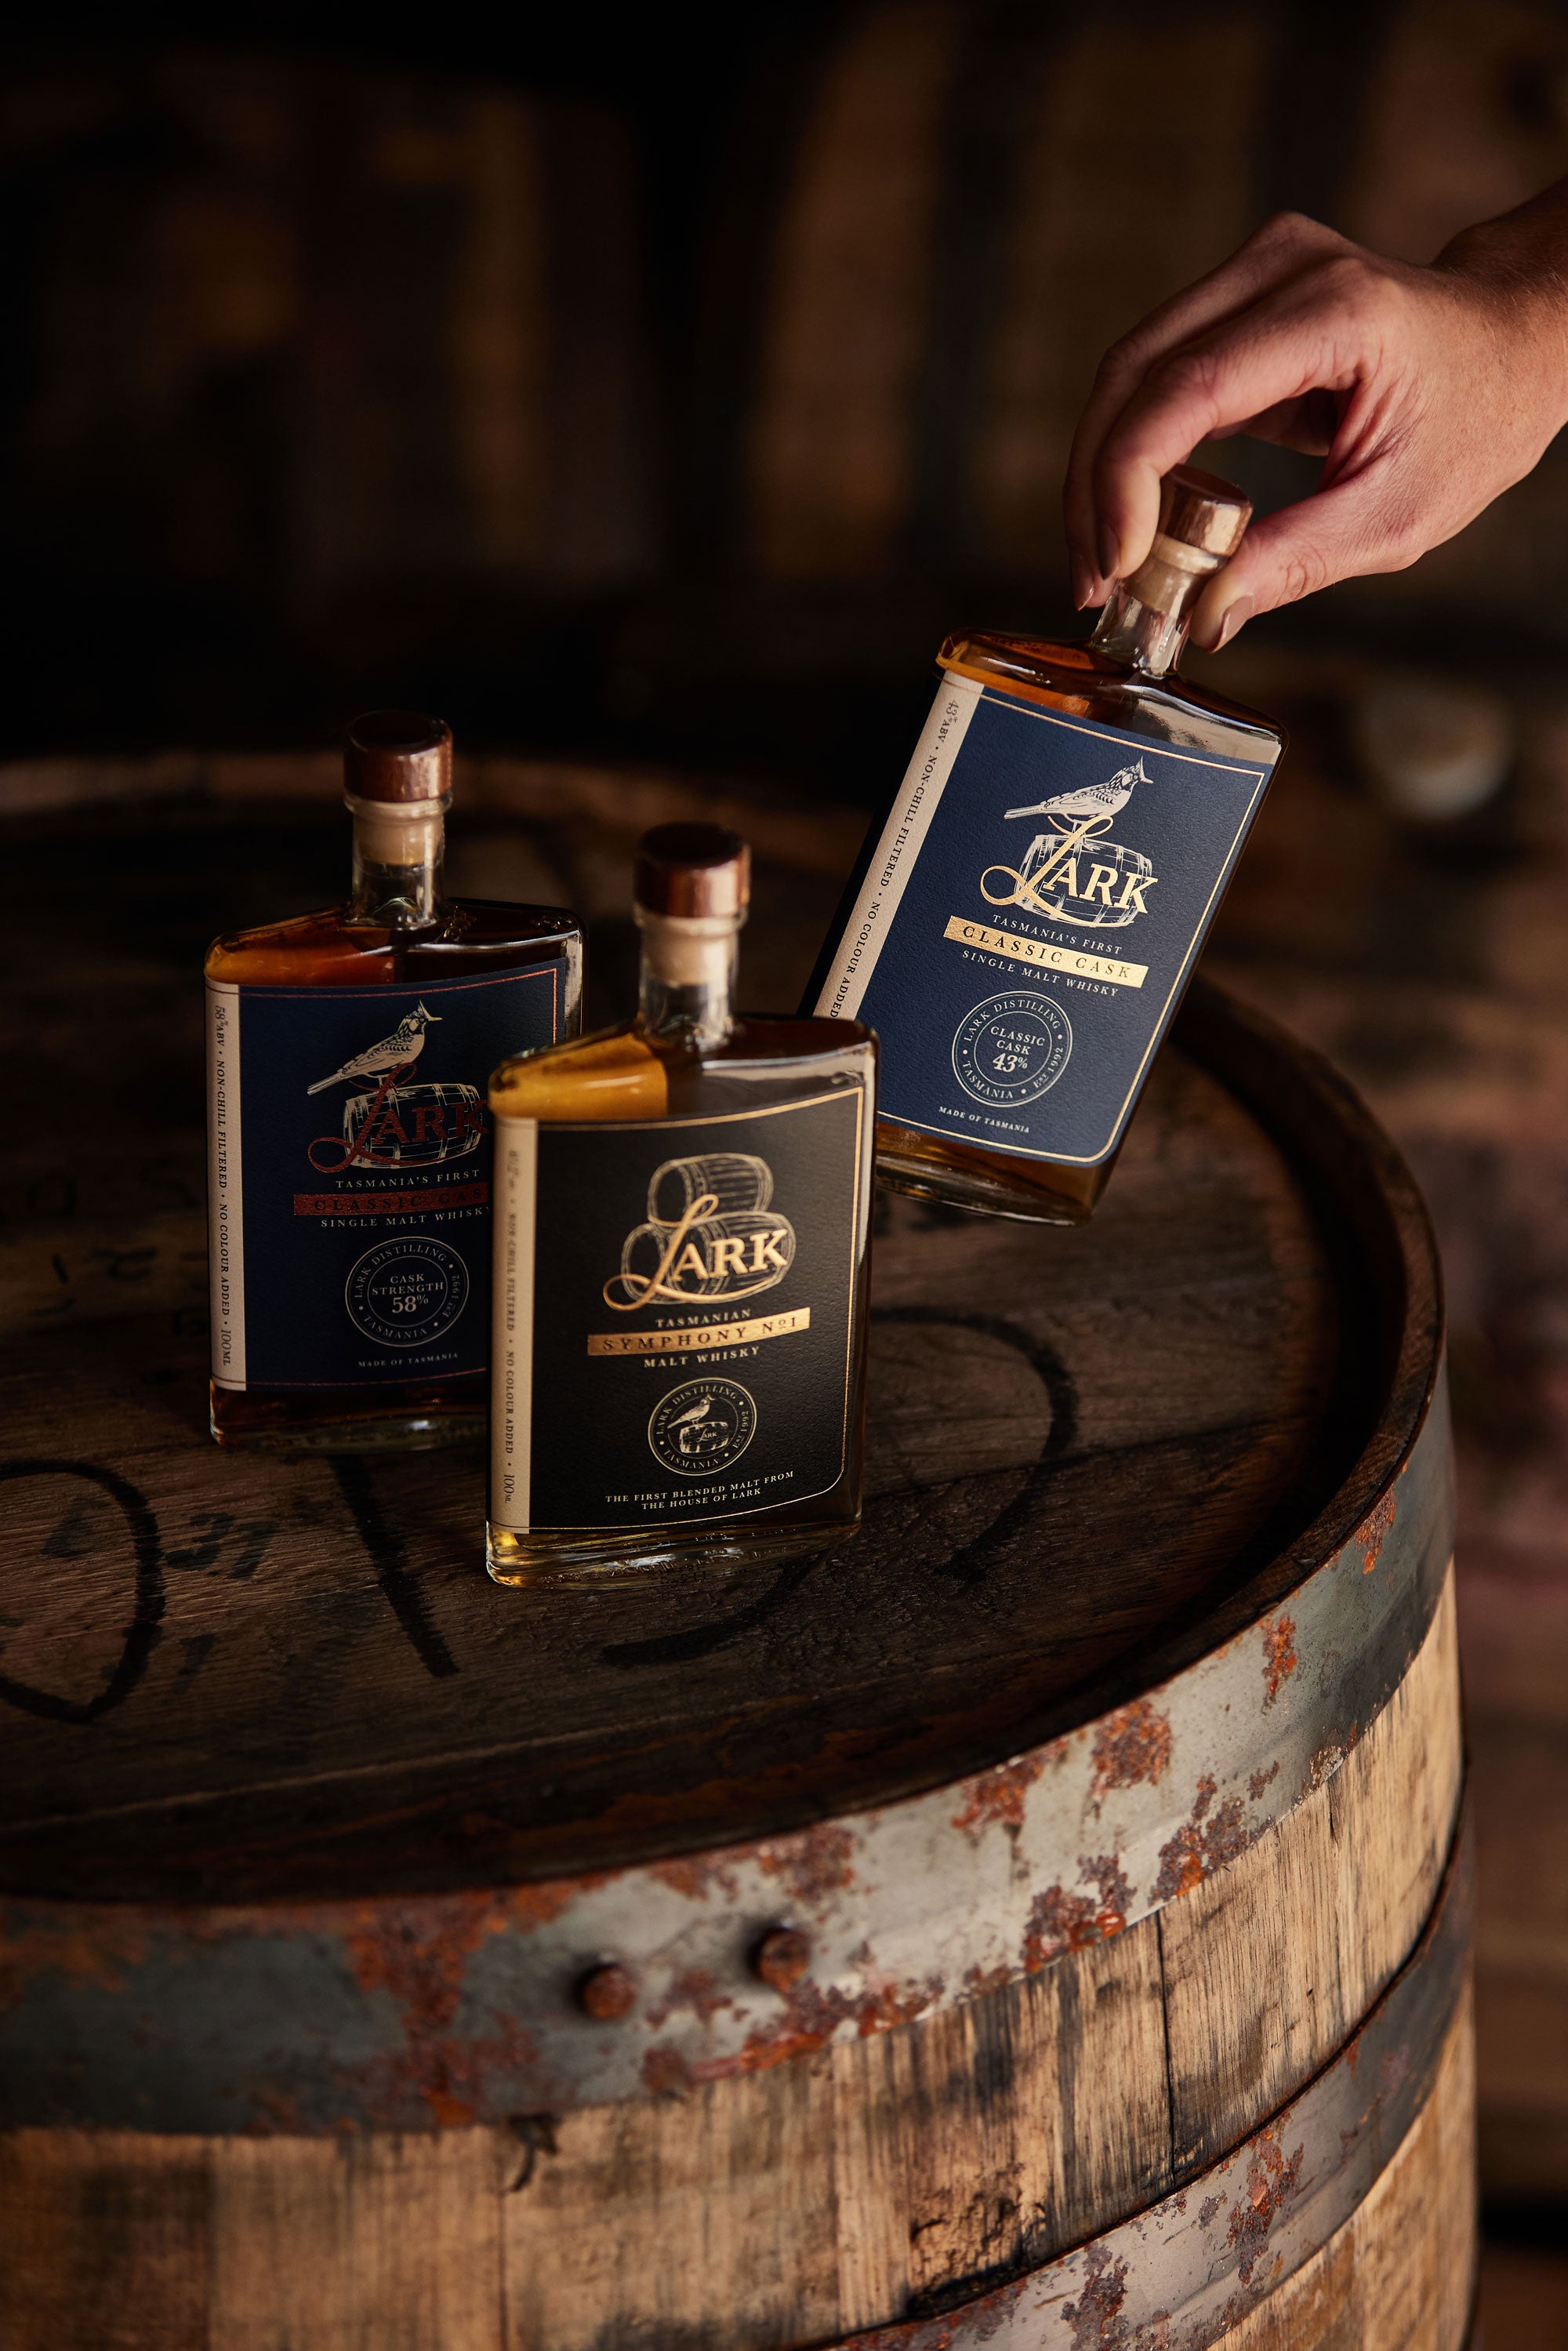 Lark’s Whisky Tasting Set Is The Perfect Gift For Whisky Lovers